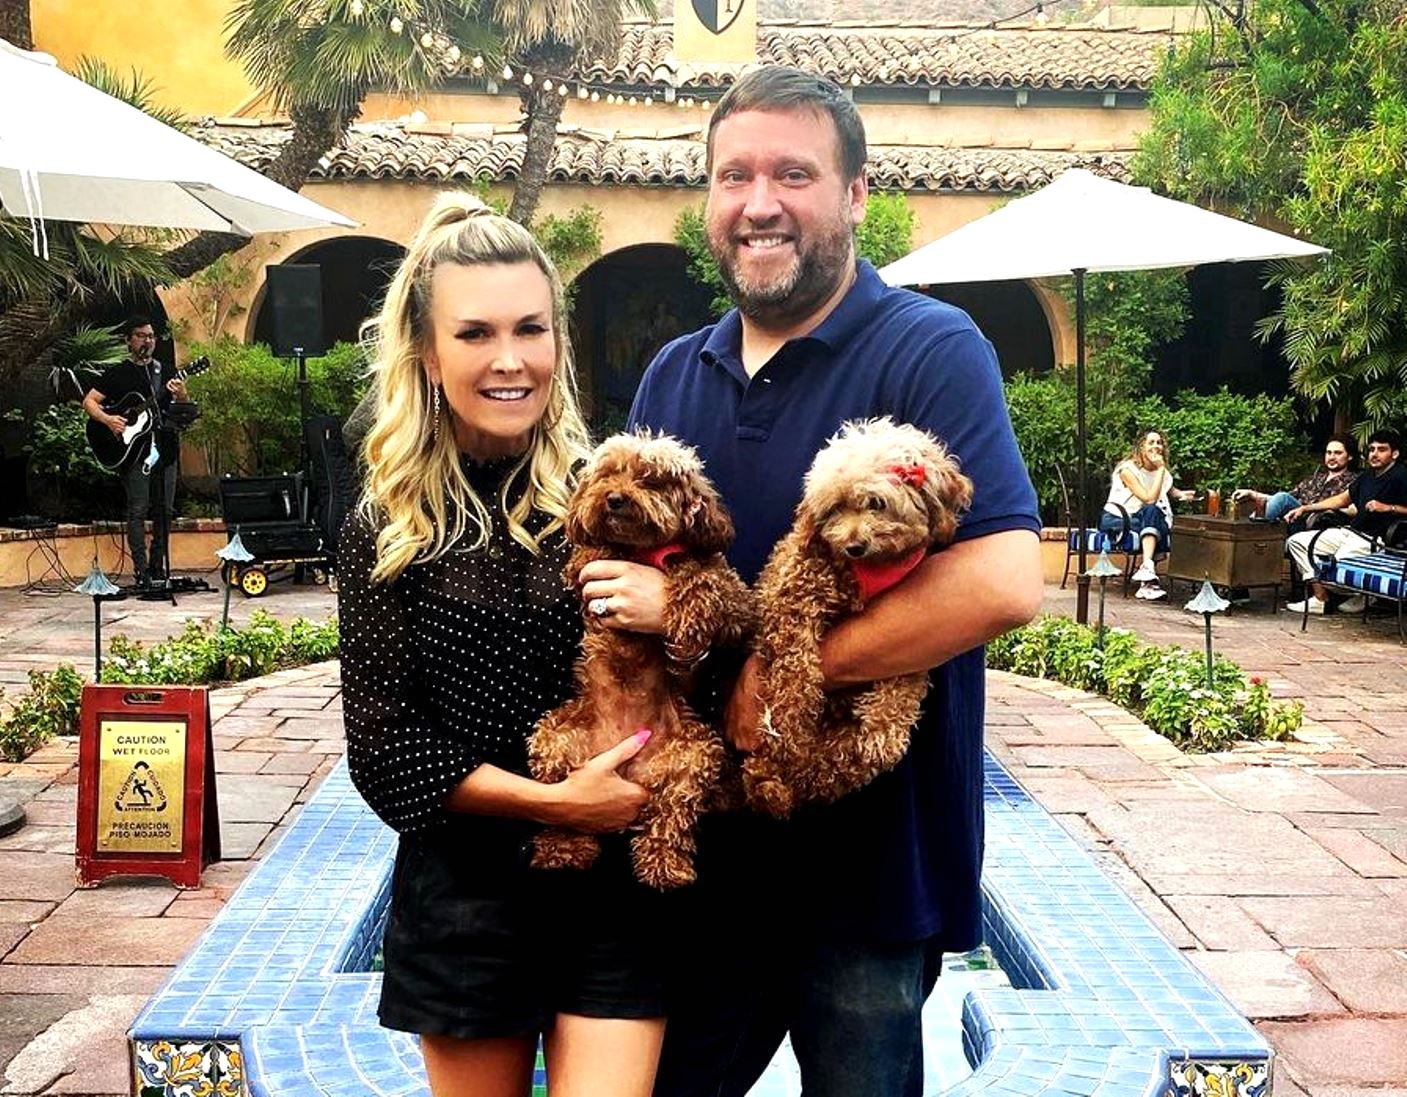 Tinsley Mortimer “Blindsided” Over End of Engagement to Scott Kluth, He Issues Statement as Sources Say RHONY Alum is “Devastated” and “Heartbroken”